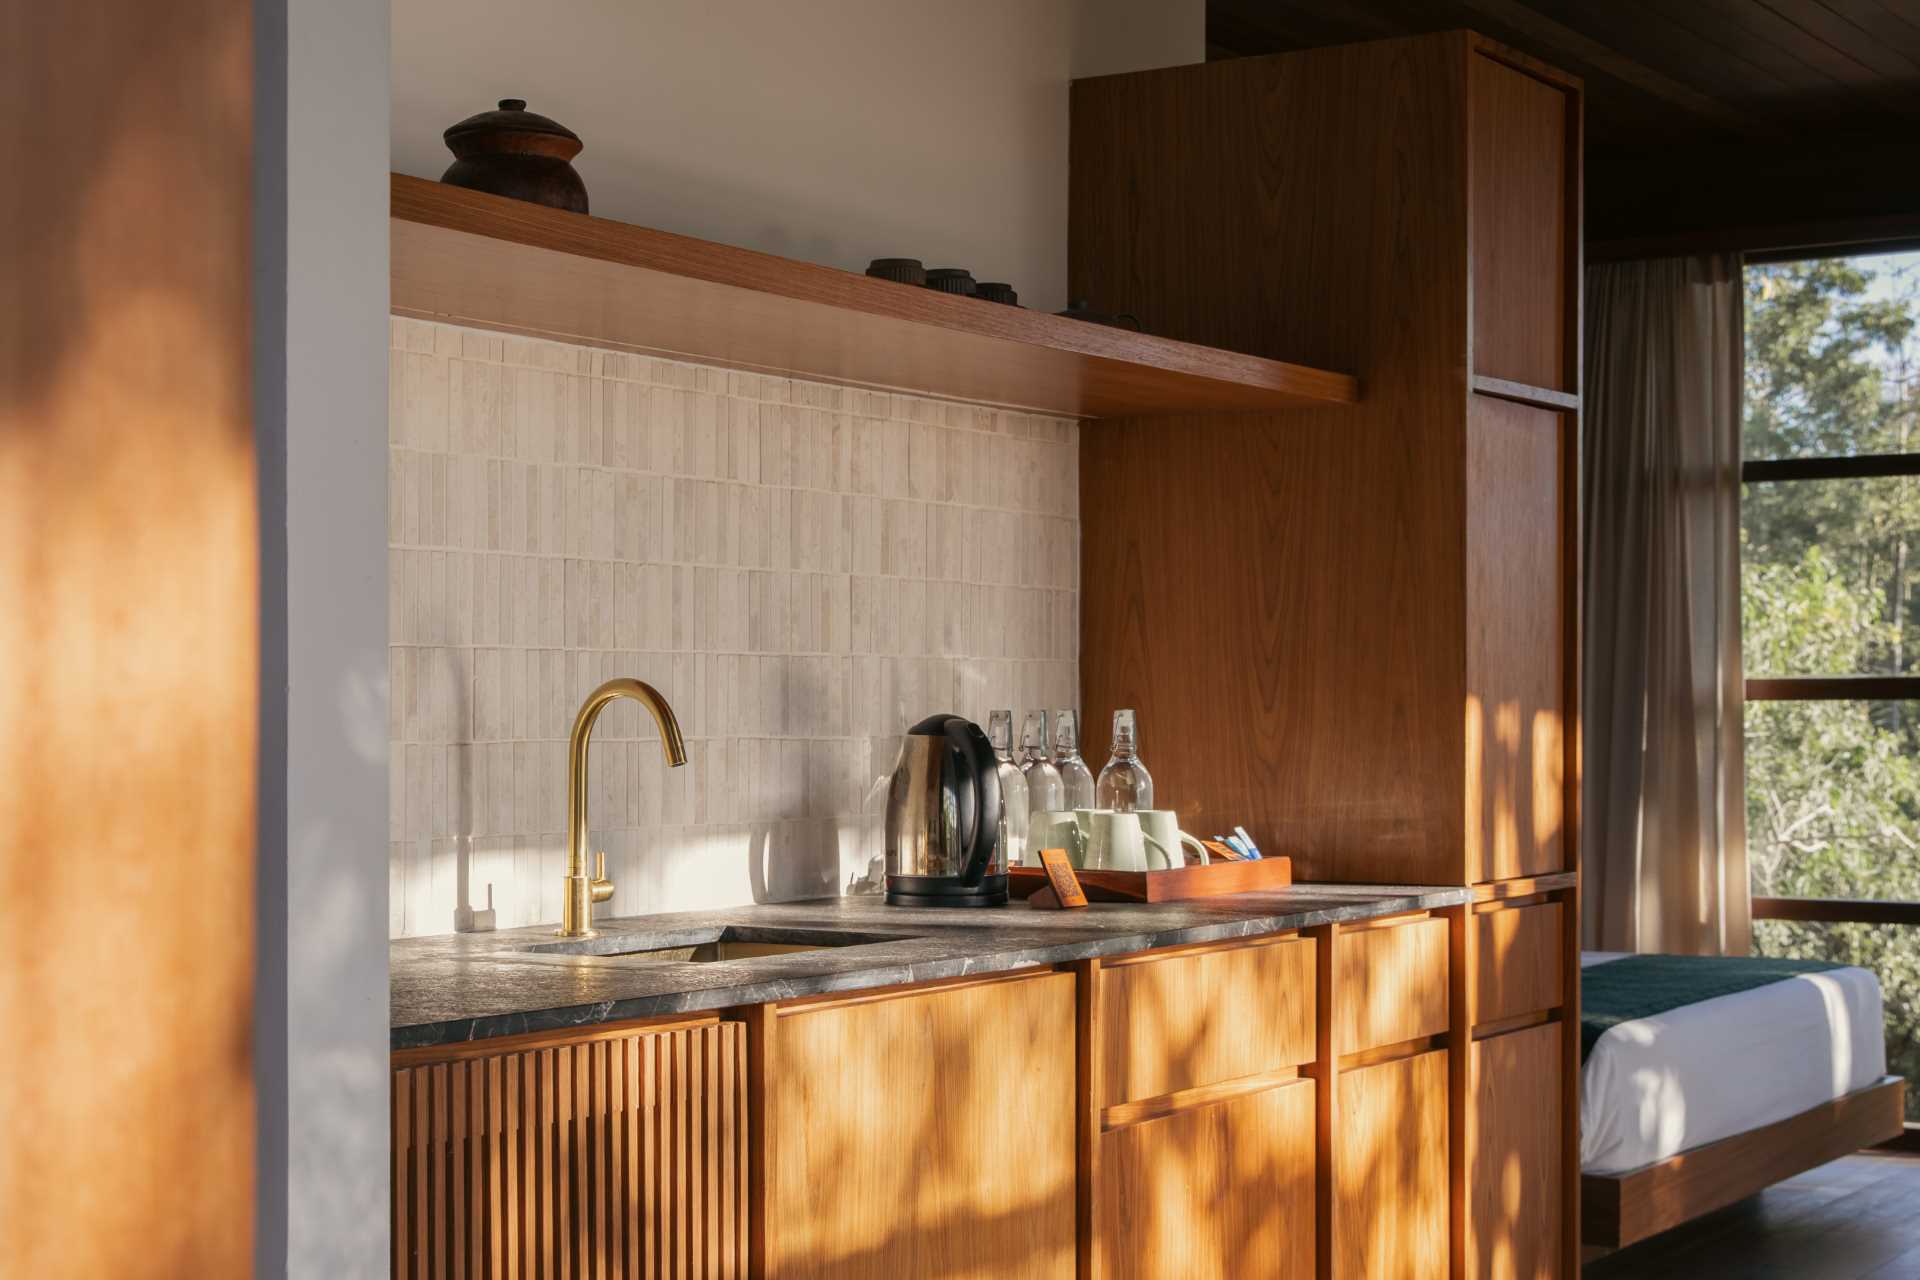 A modern kitchenette with wood cabinetry.